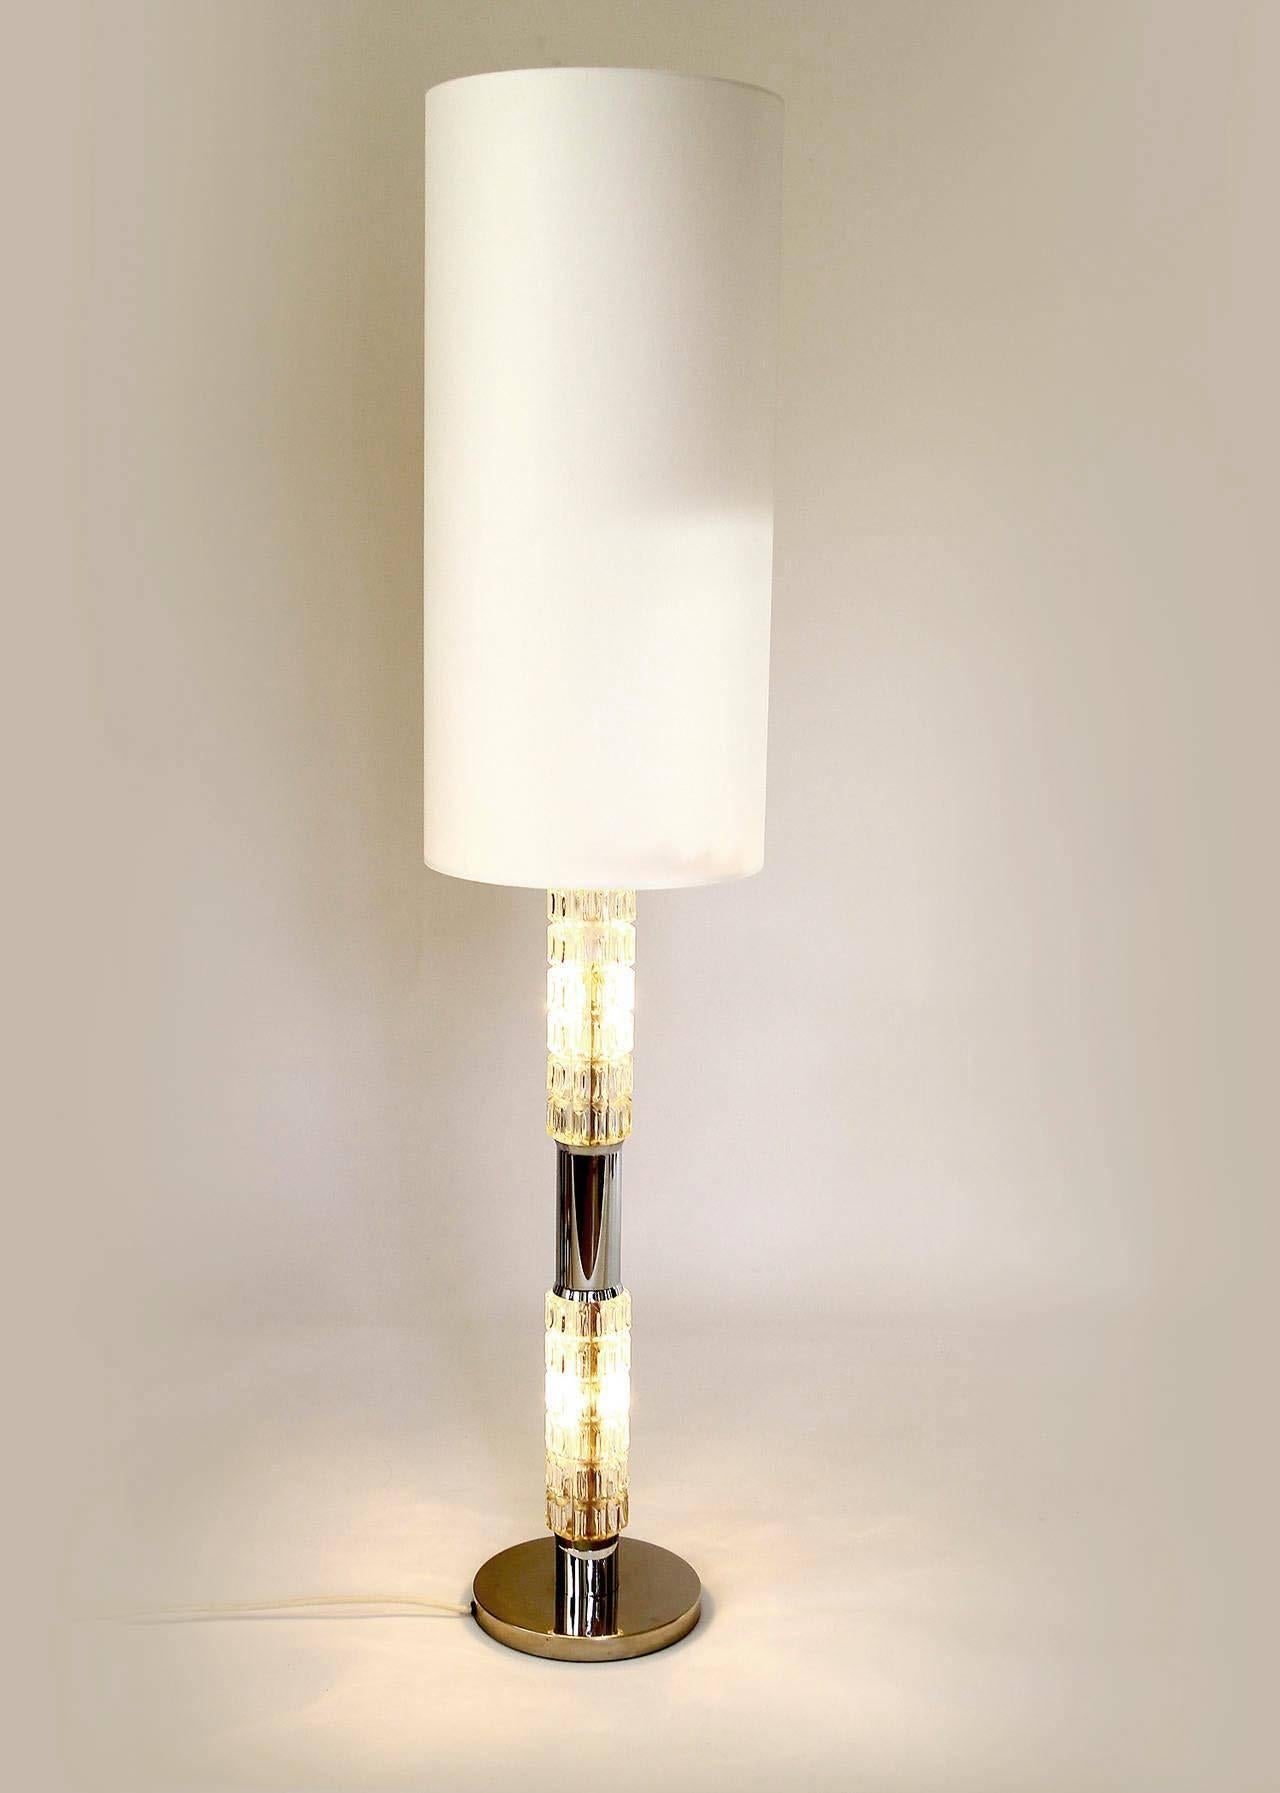 Mid-Century Modern Richard Essig Floor or Table Lamp with Illuminated Glass Stand, 1970s For Sale